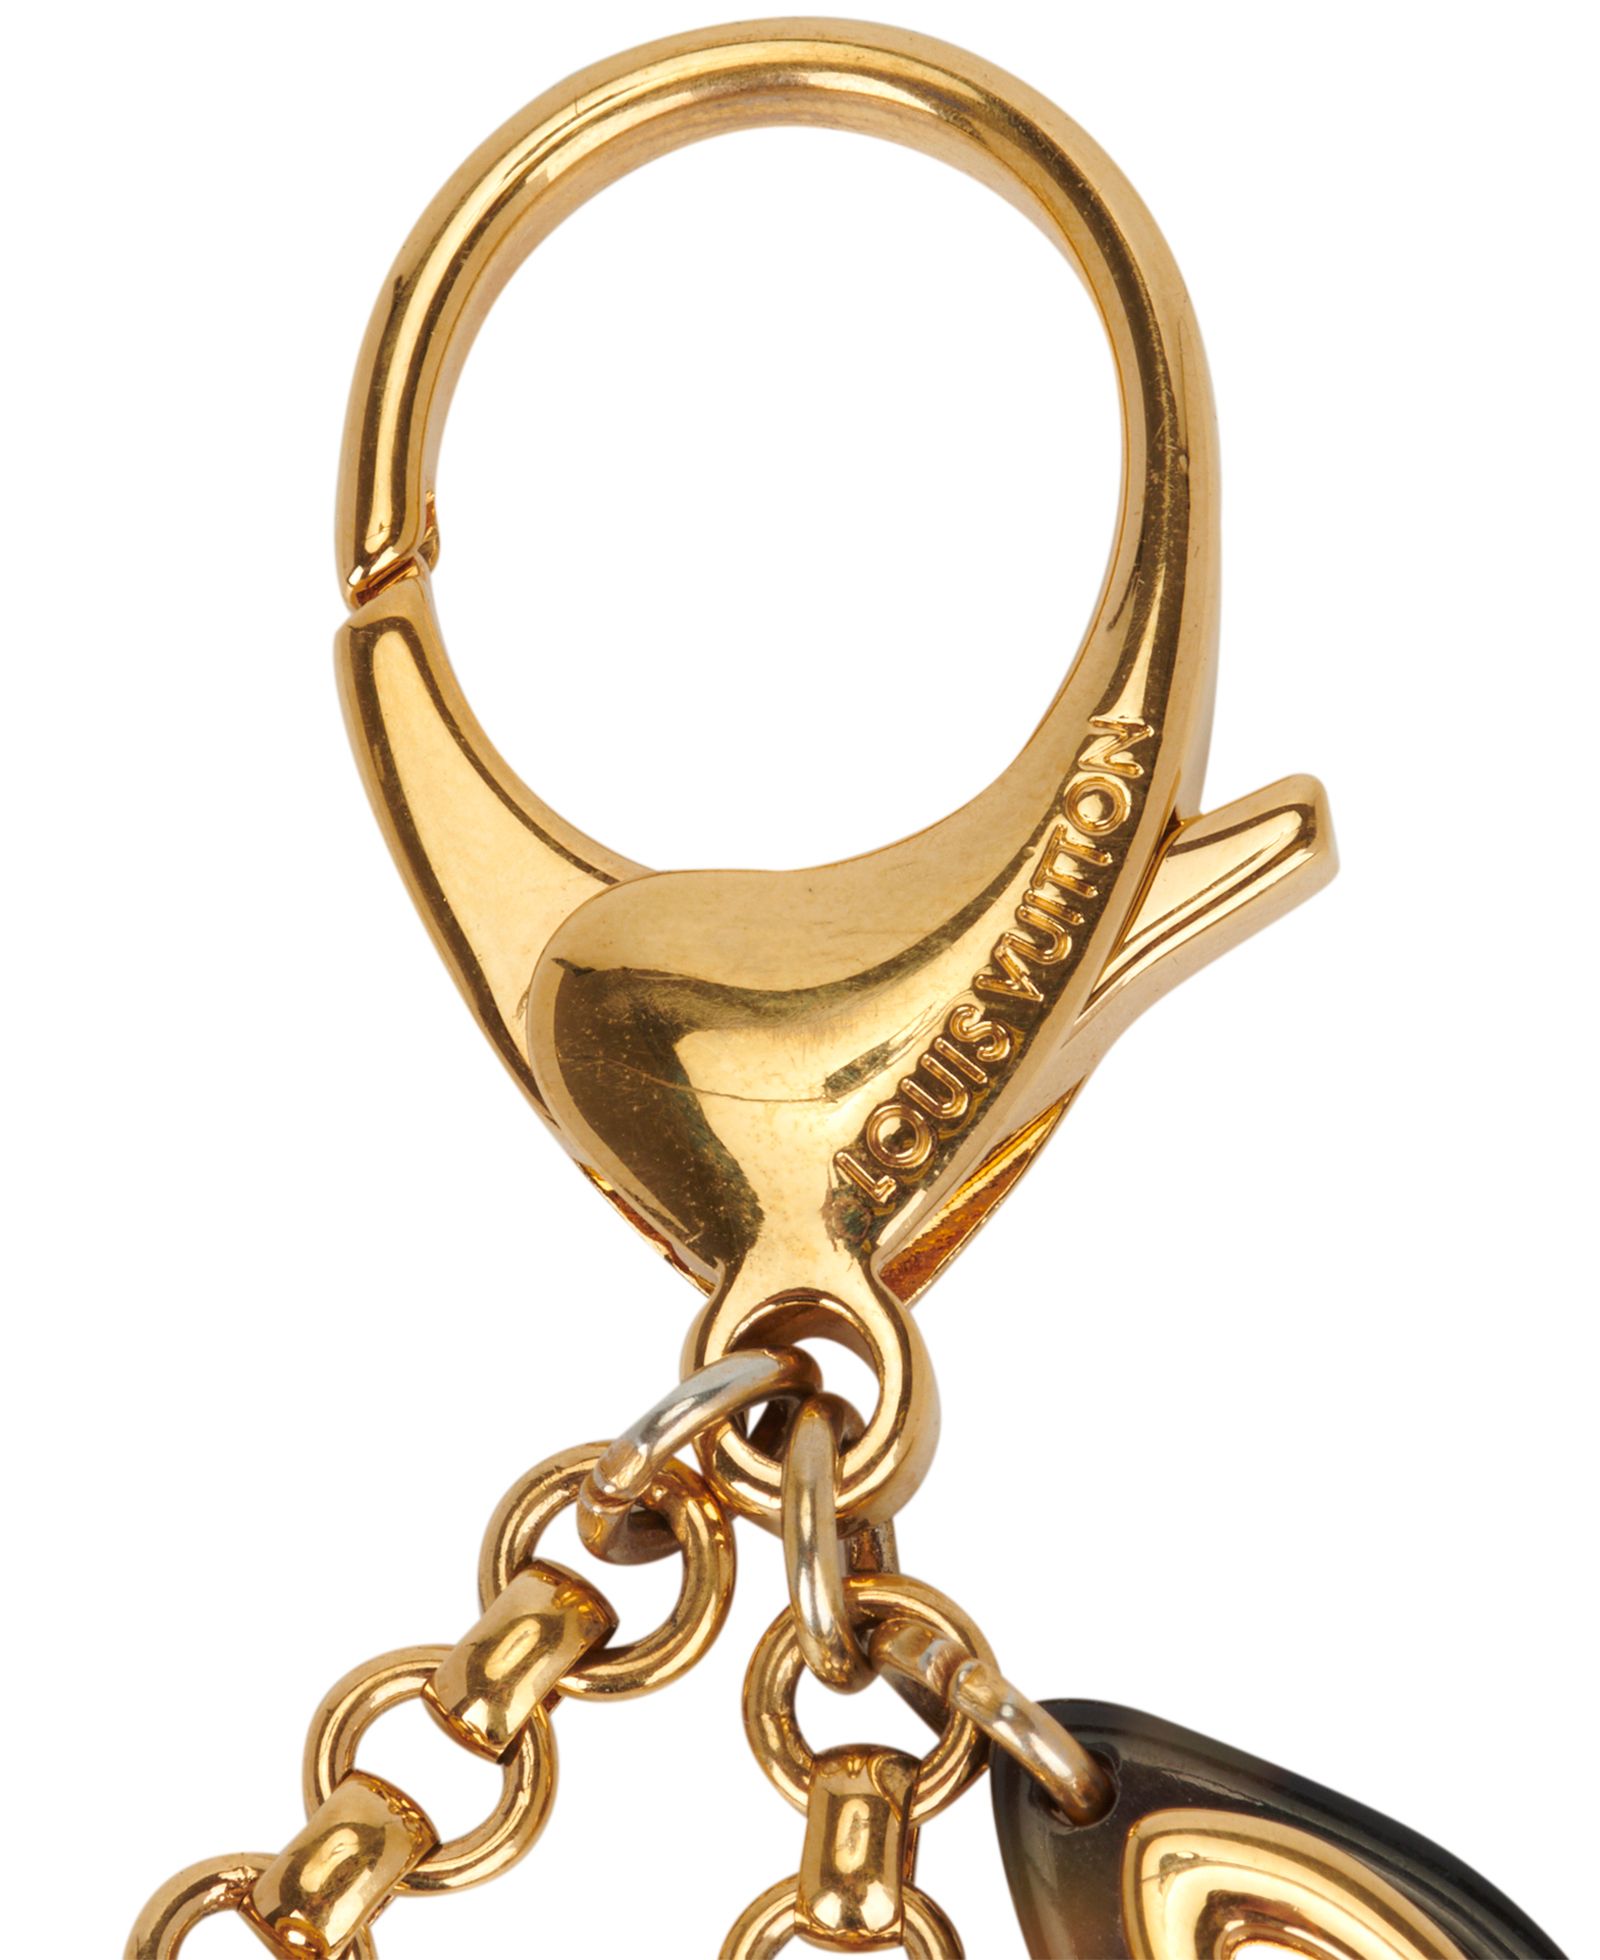 Louis Vuitton Insolence Bag Charm - Gold Keychains, Accessories - LOU709430